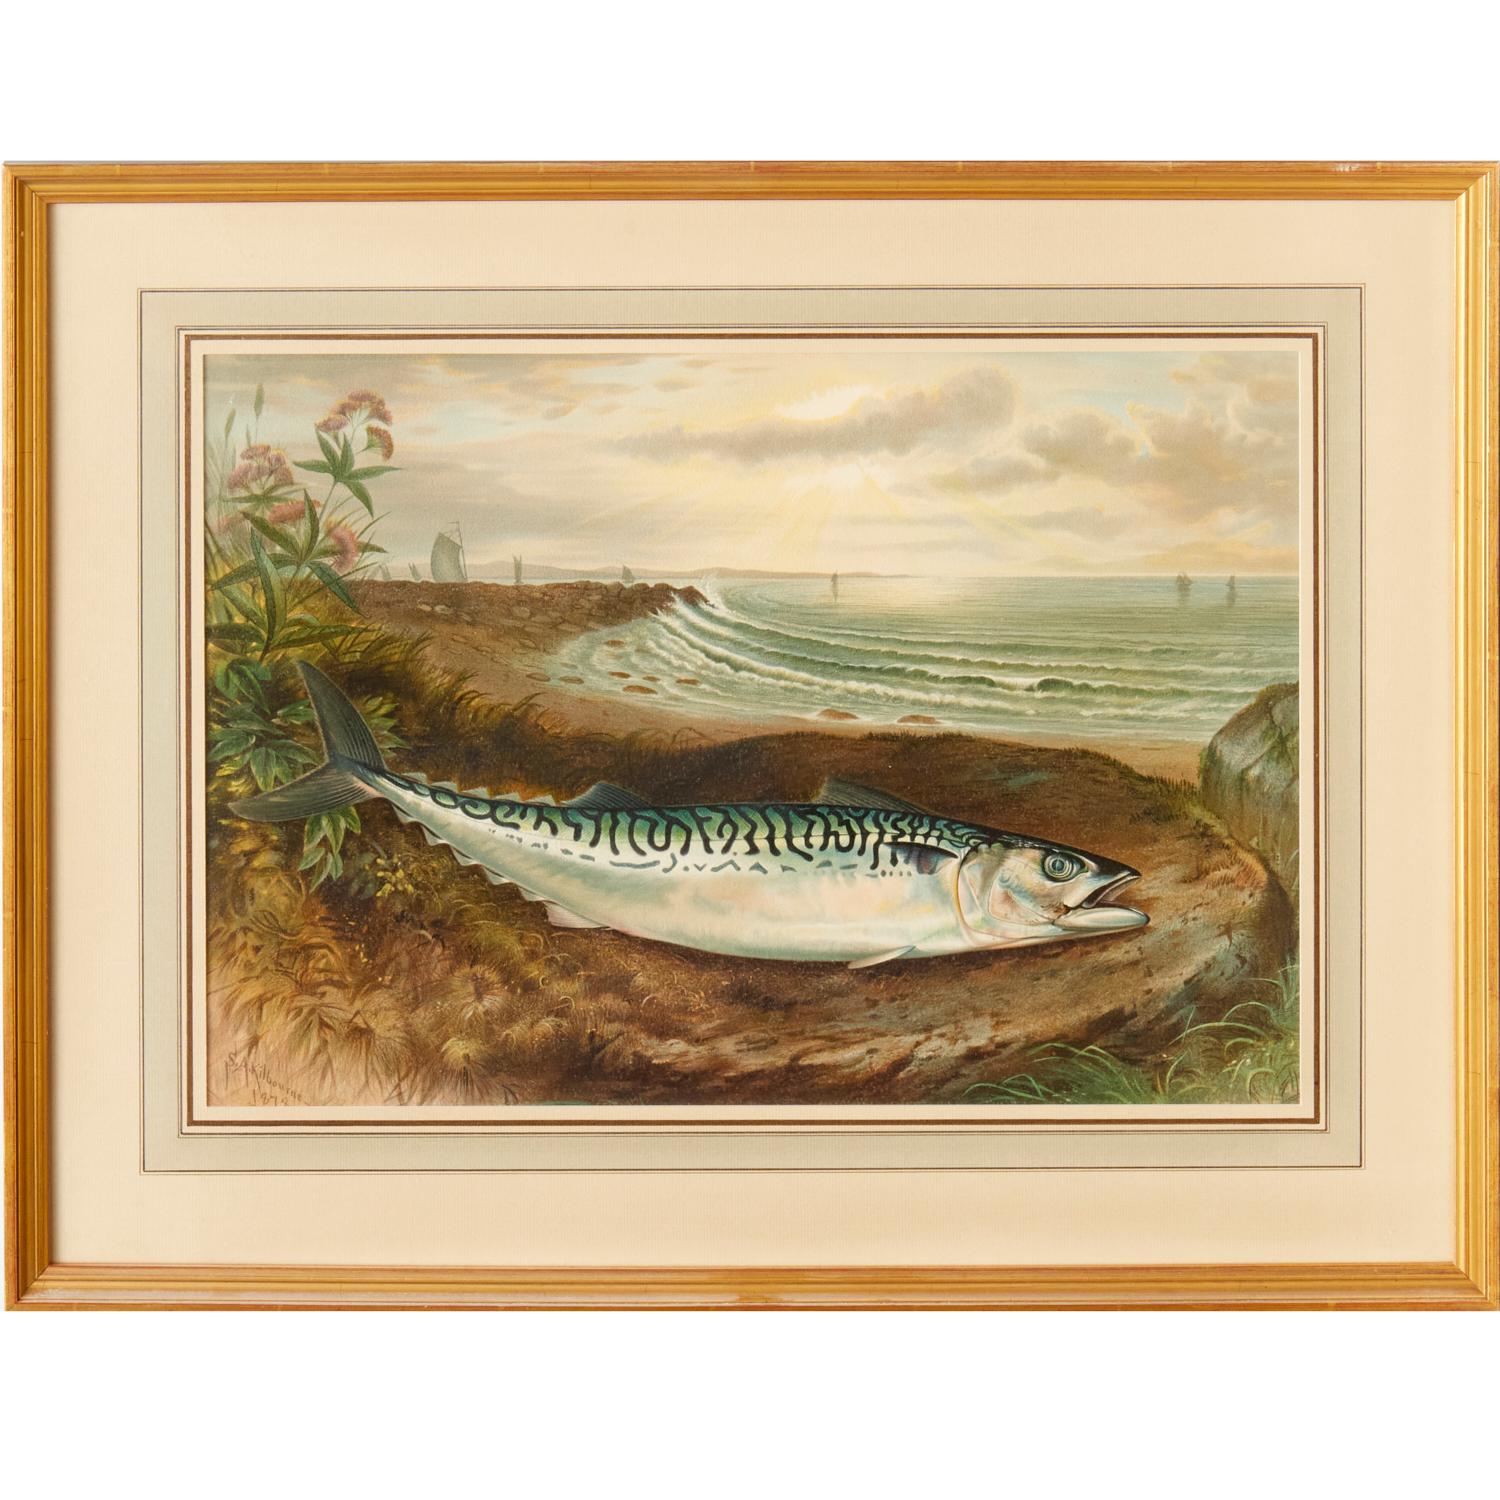 S. A. Kilbourne: „Game Fishes of the United States“, 4 gerahmte Chromolithographien  (amerikanisch) im Angebot